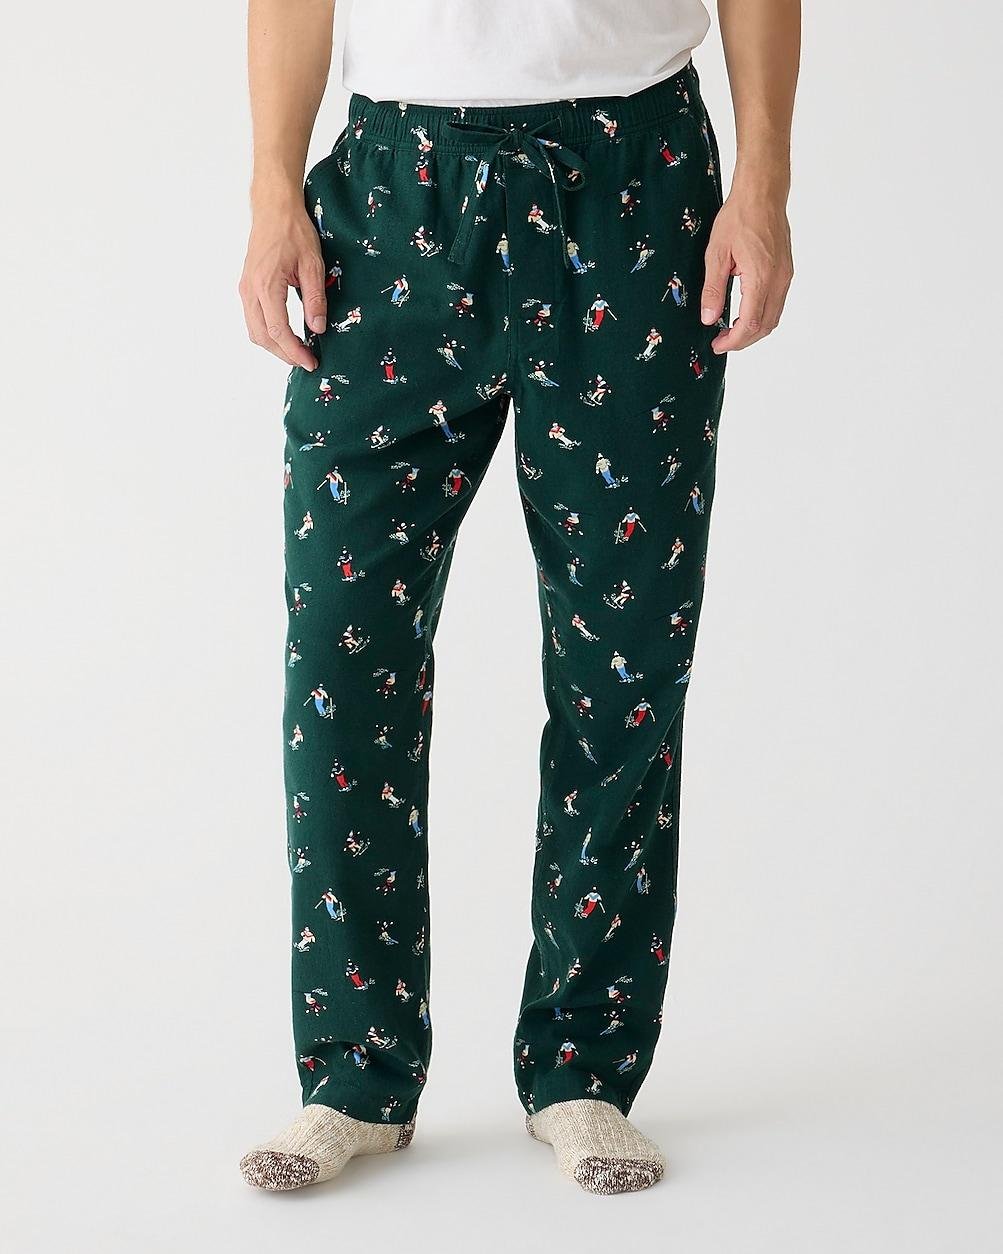 Flannel pajama pant in print by J.CREW